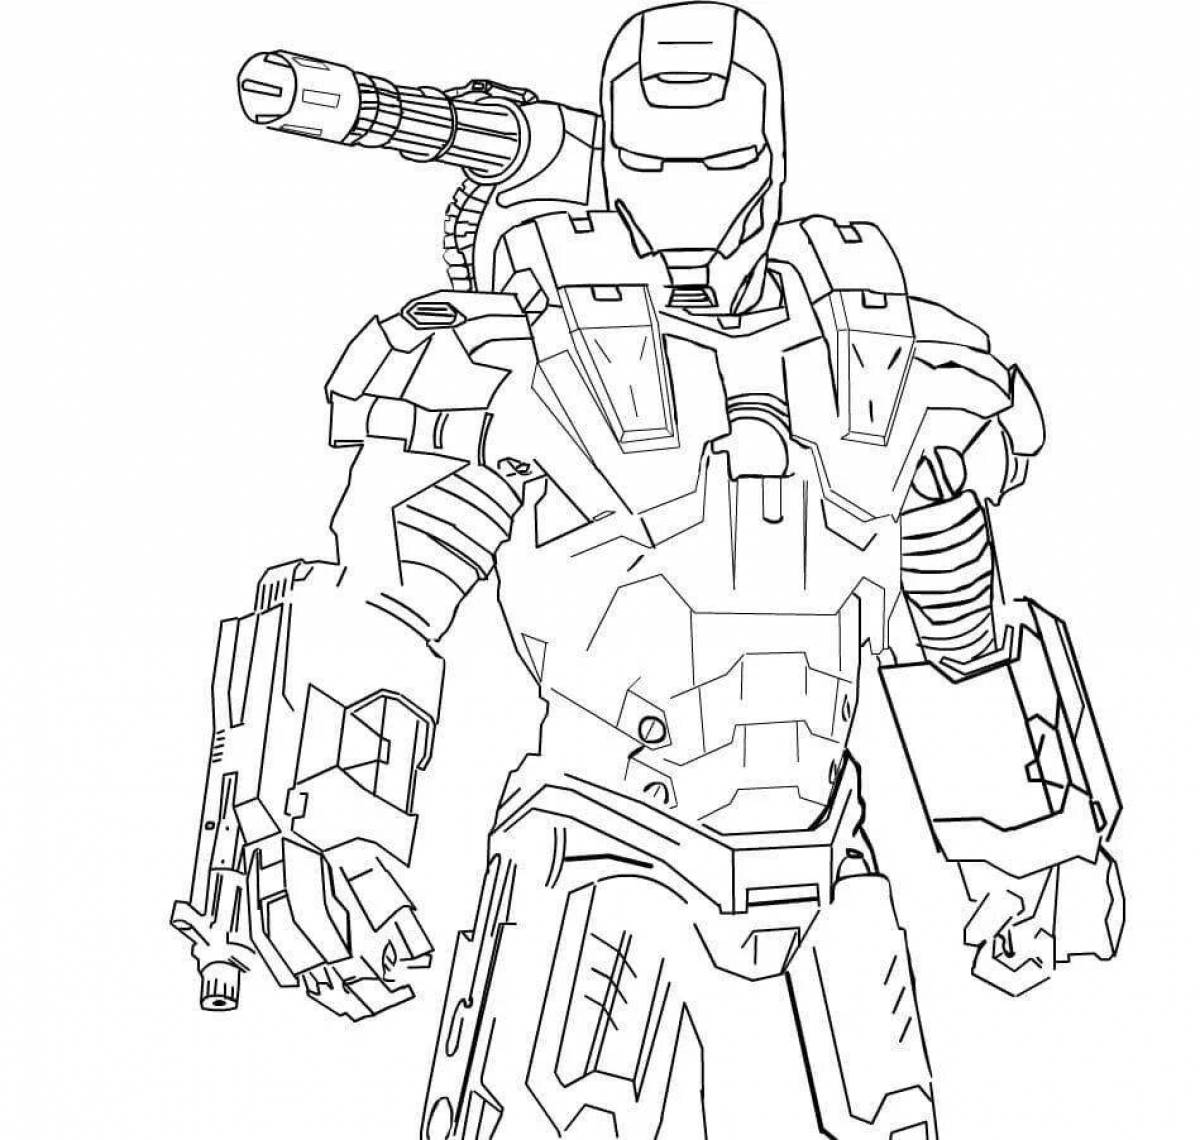 Luxury iron patriot coloring page